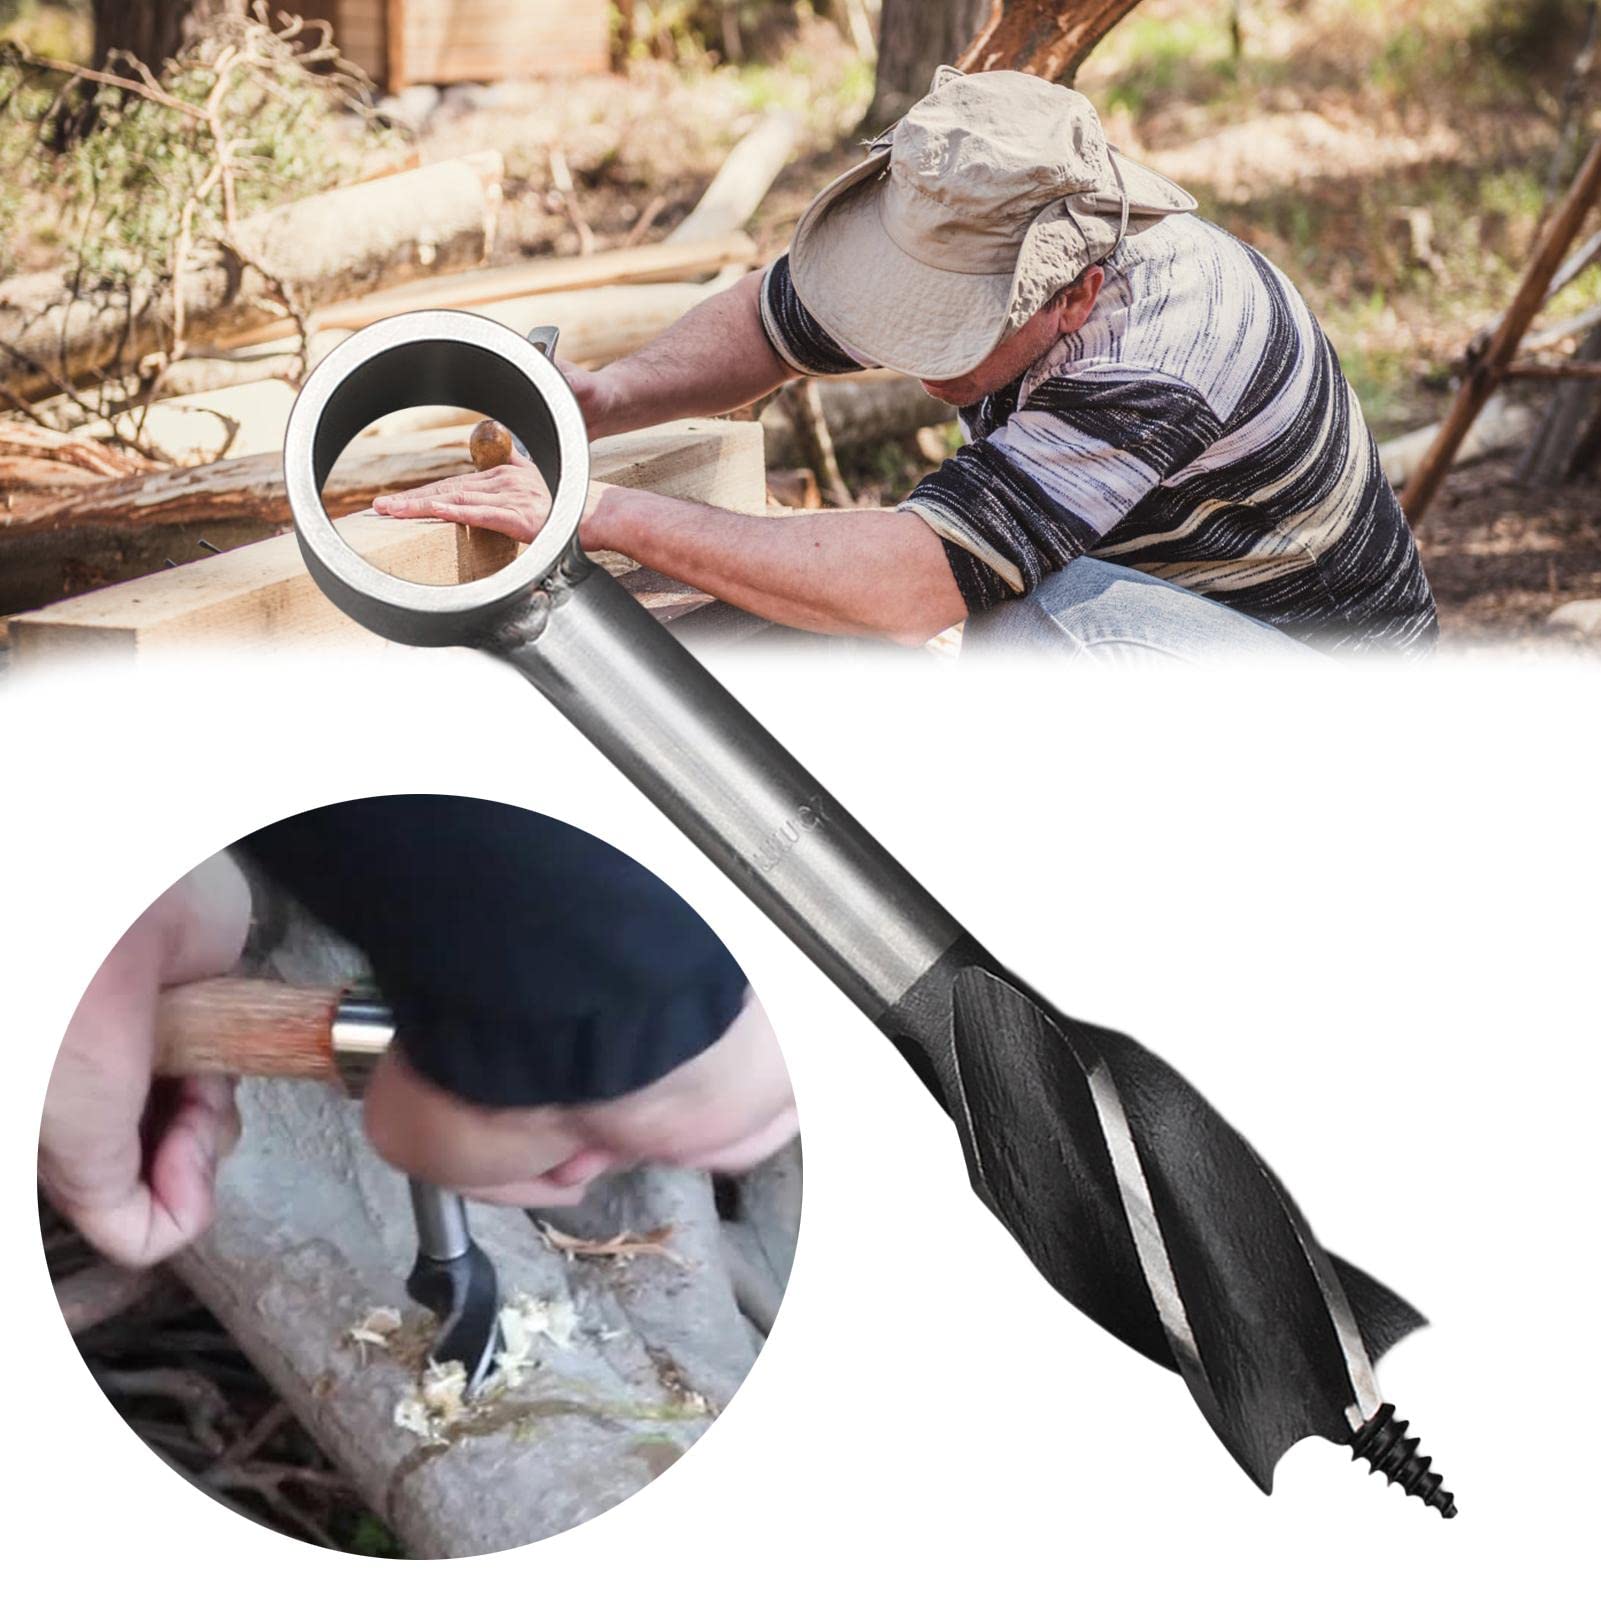 Bushcraft Hand Drill, Tools, Scotch Eyed Wood Auger Drill Bit, Steel Bushcraft Hand Drill Tools, Manual Auger for Outdoor Camping Garden